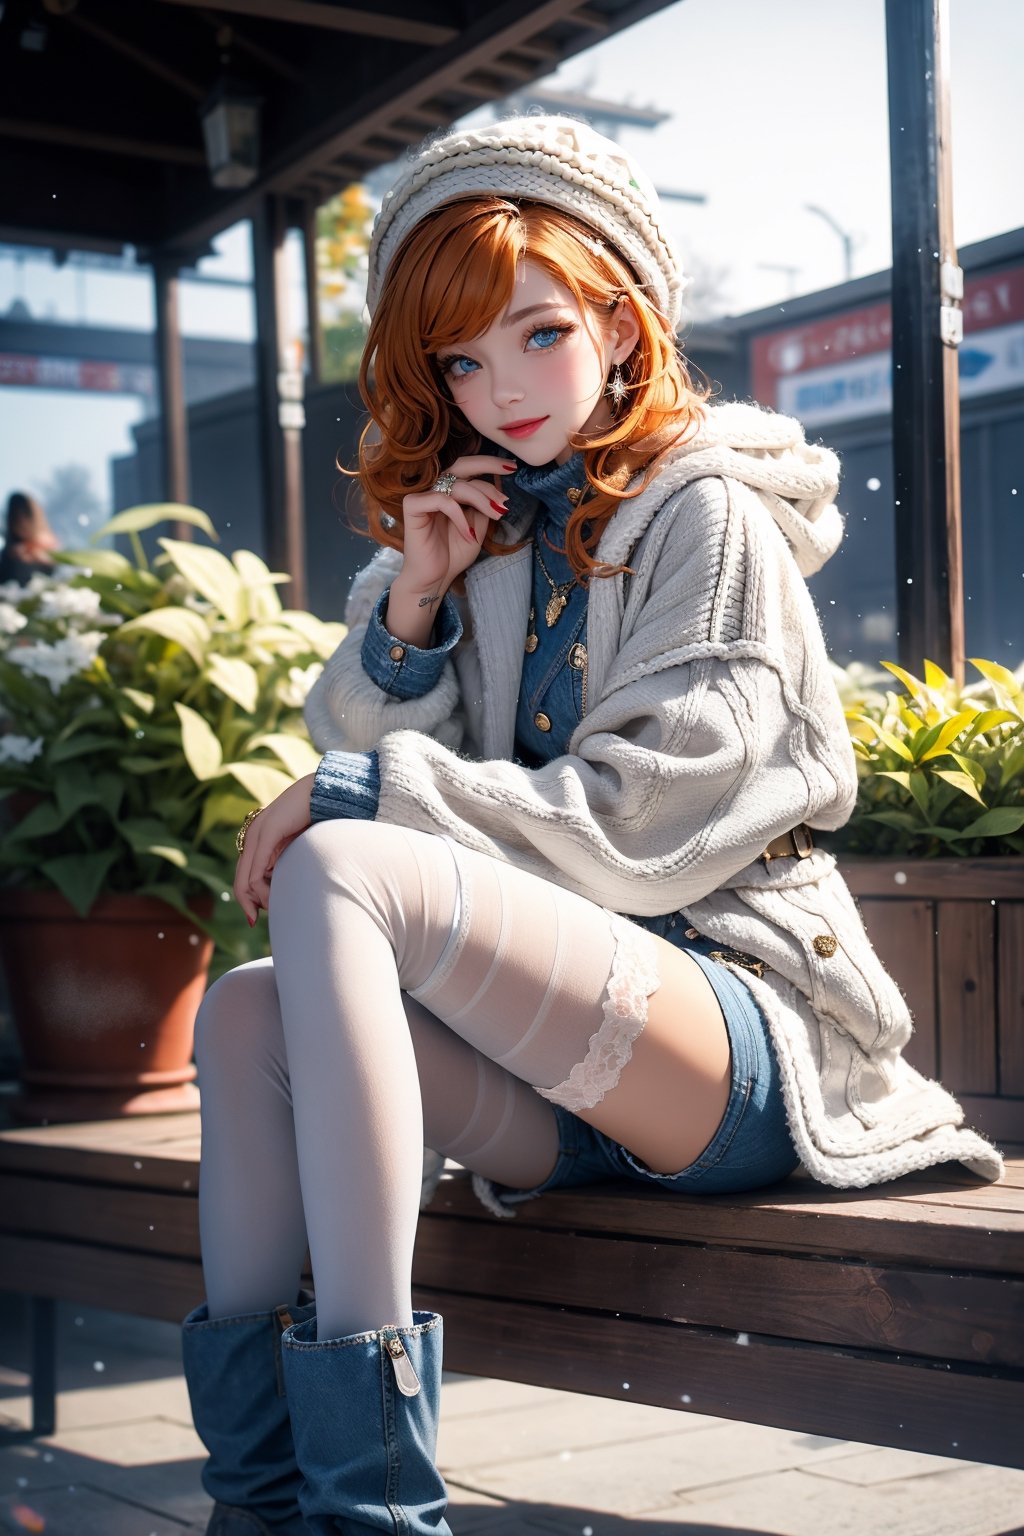 High quality, masterpiece, 1girl, sole_female, shiny short curly orange hair, dazzling blue eyes, white winter coat, a wool hat, denim shorts, pantyhose, ankle boots, white winter coat, a wool hat, denim shorts, pantyhose, ankle boots, sitting in a terrace garden illuminated by a series of small lights